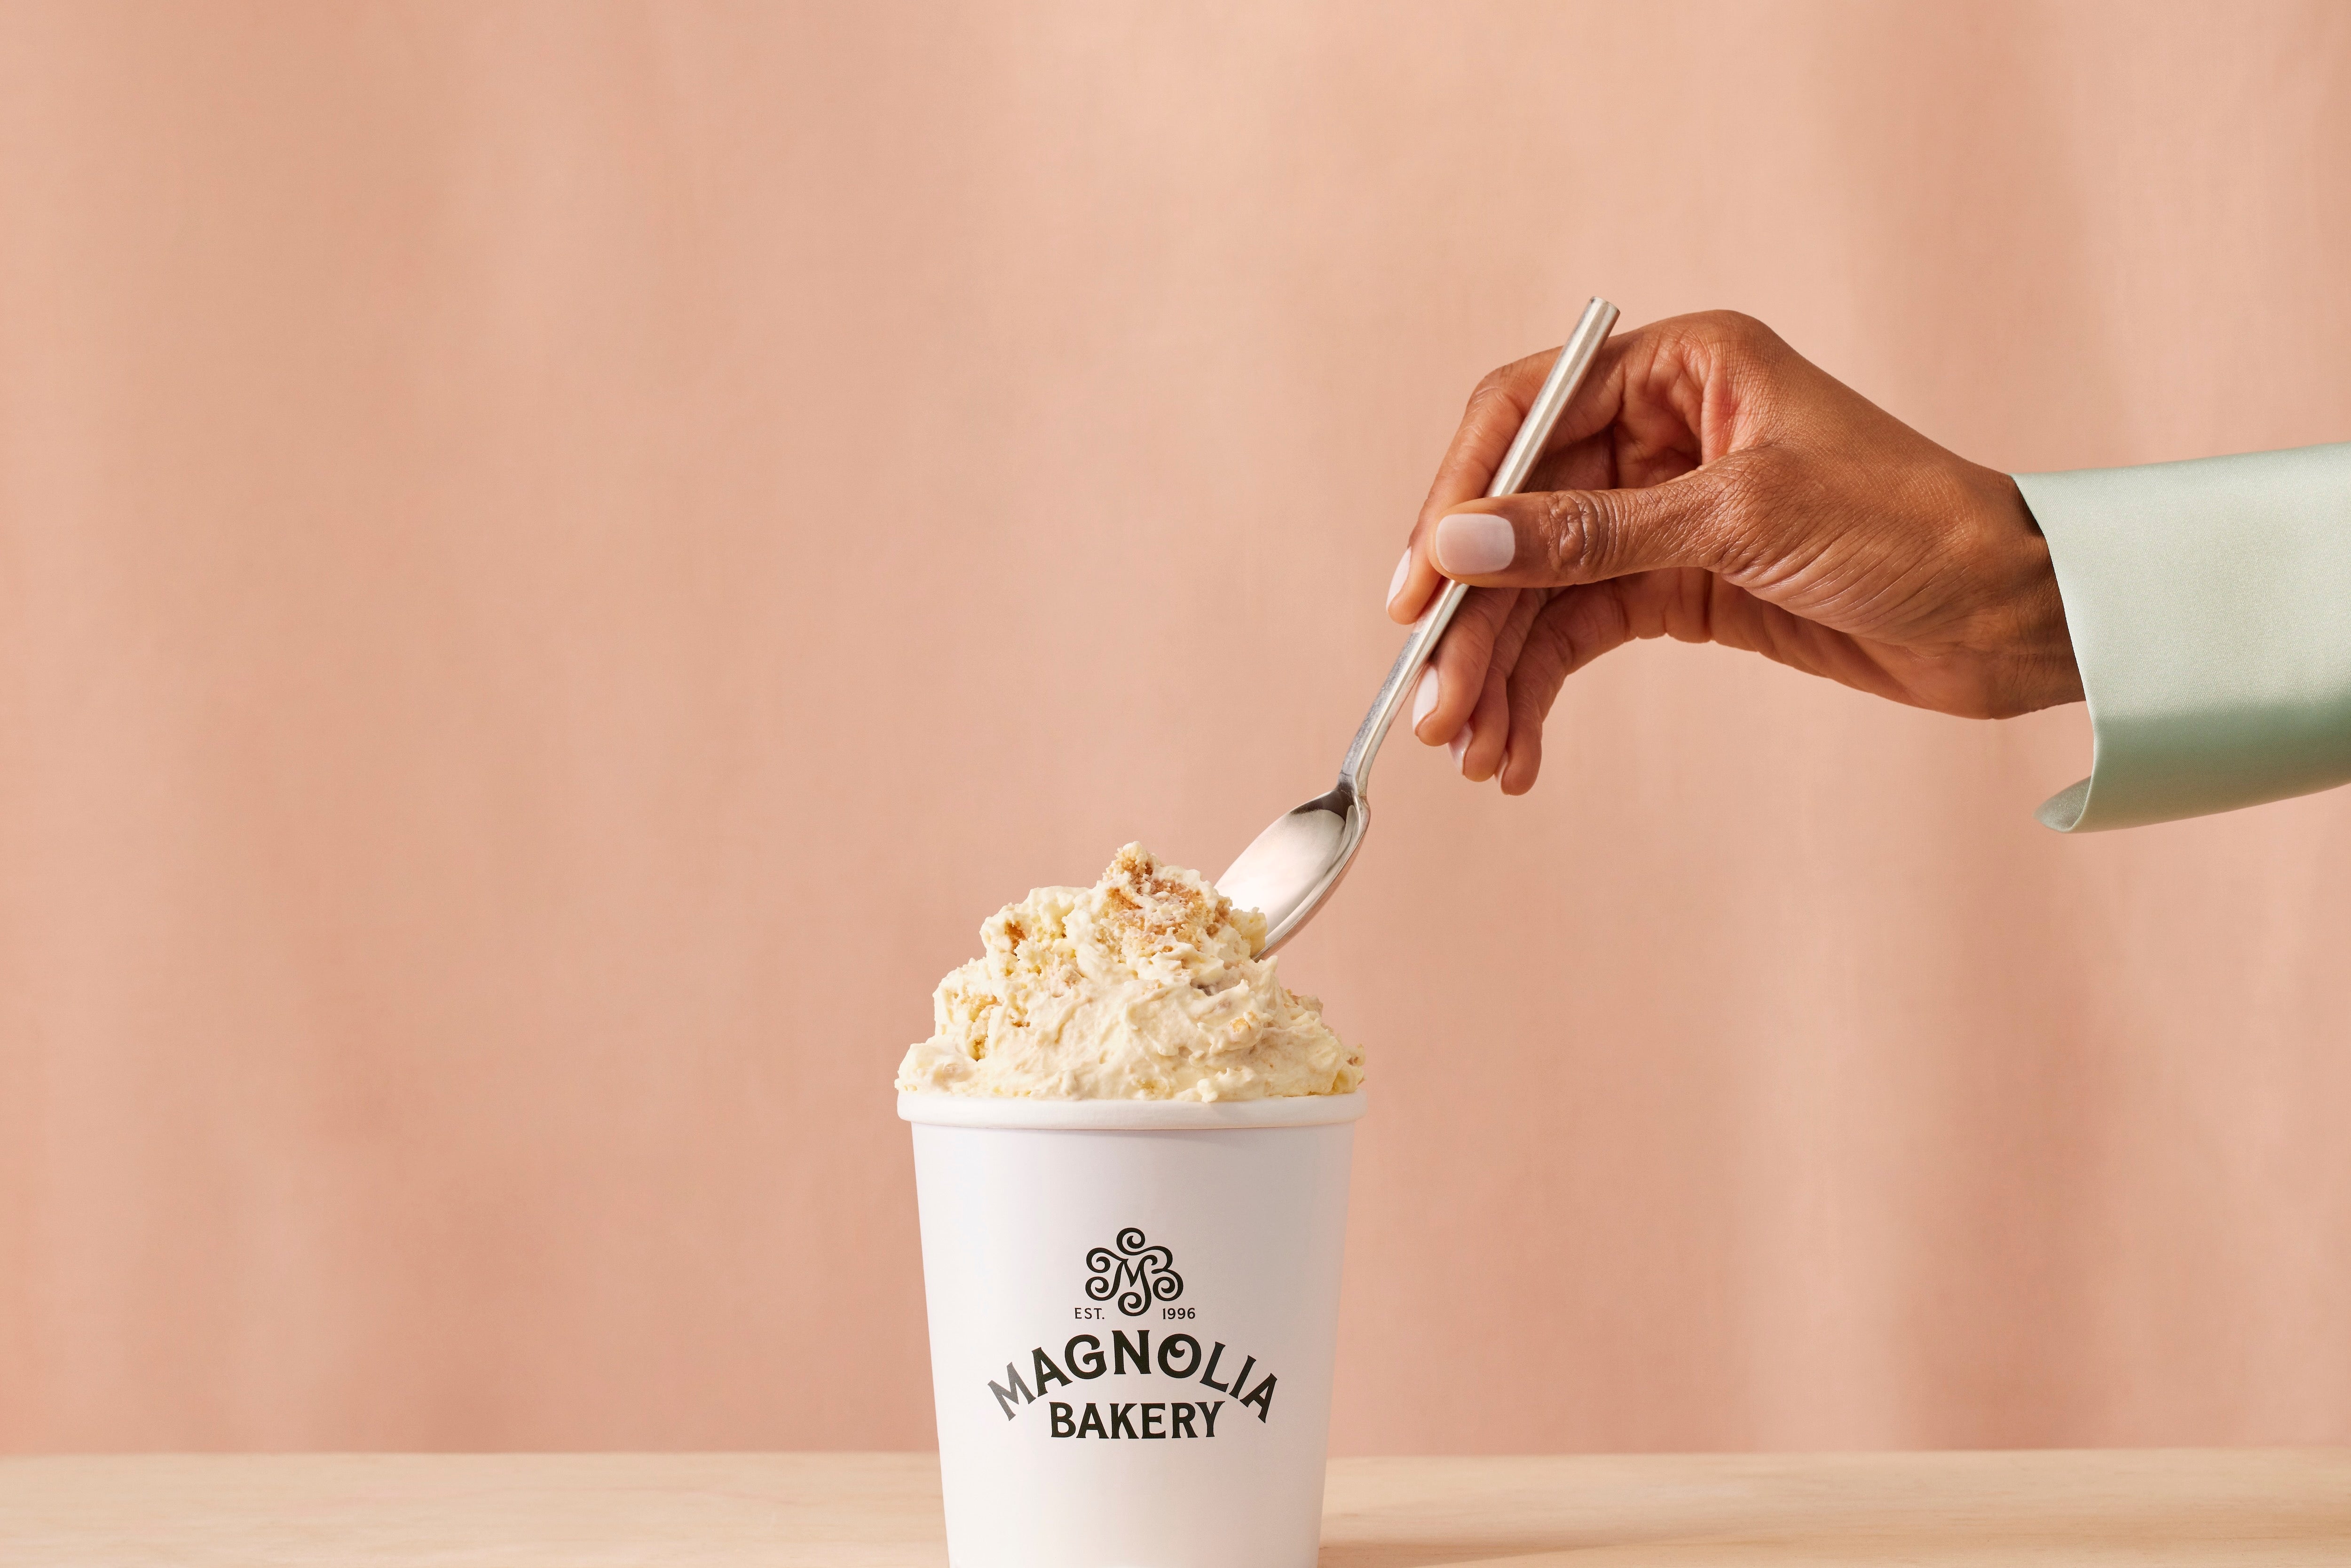 a hand reaches toward a magnolia bakery banana pudding with a silver spoon in hand.